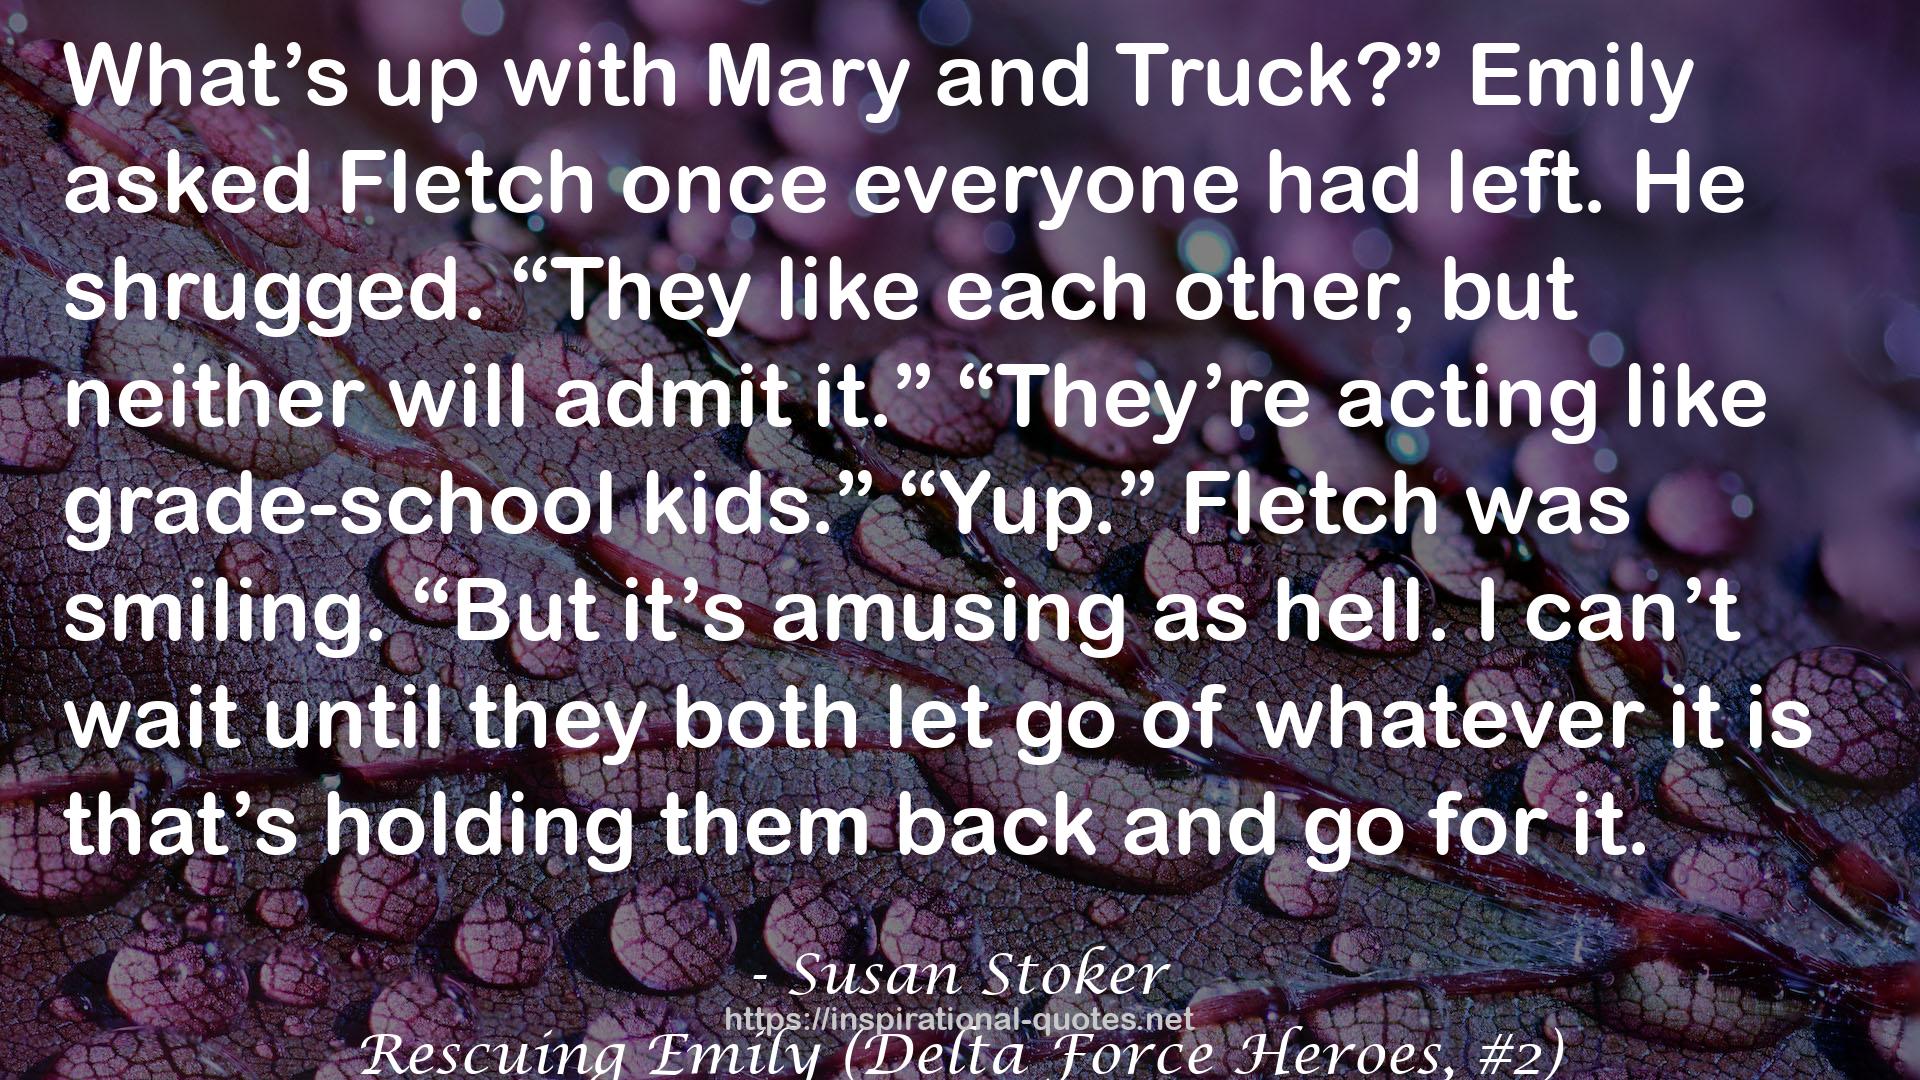 Rescuing Emily (Delta Force Heroes, #2) QUOTES